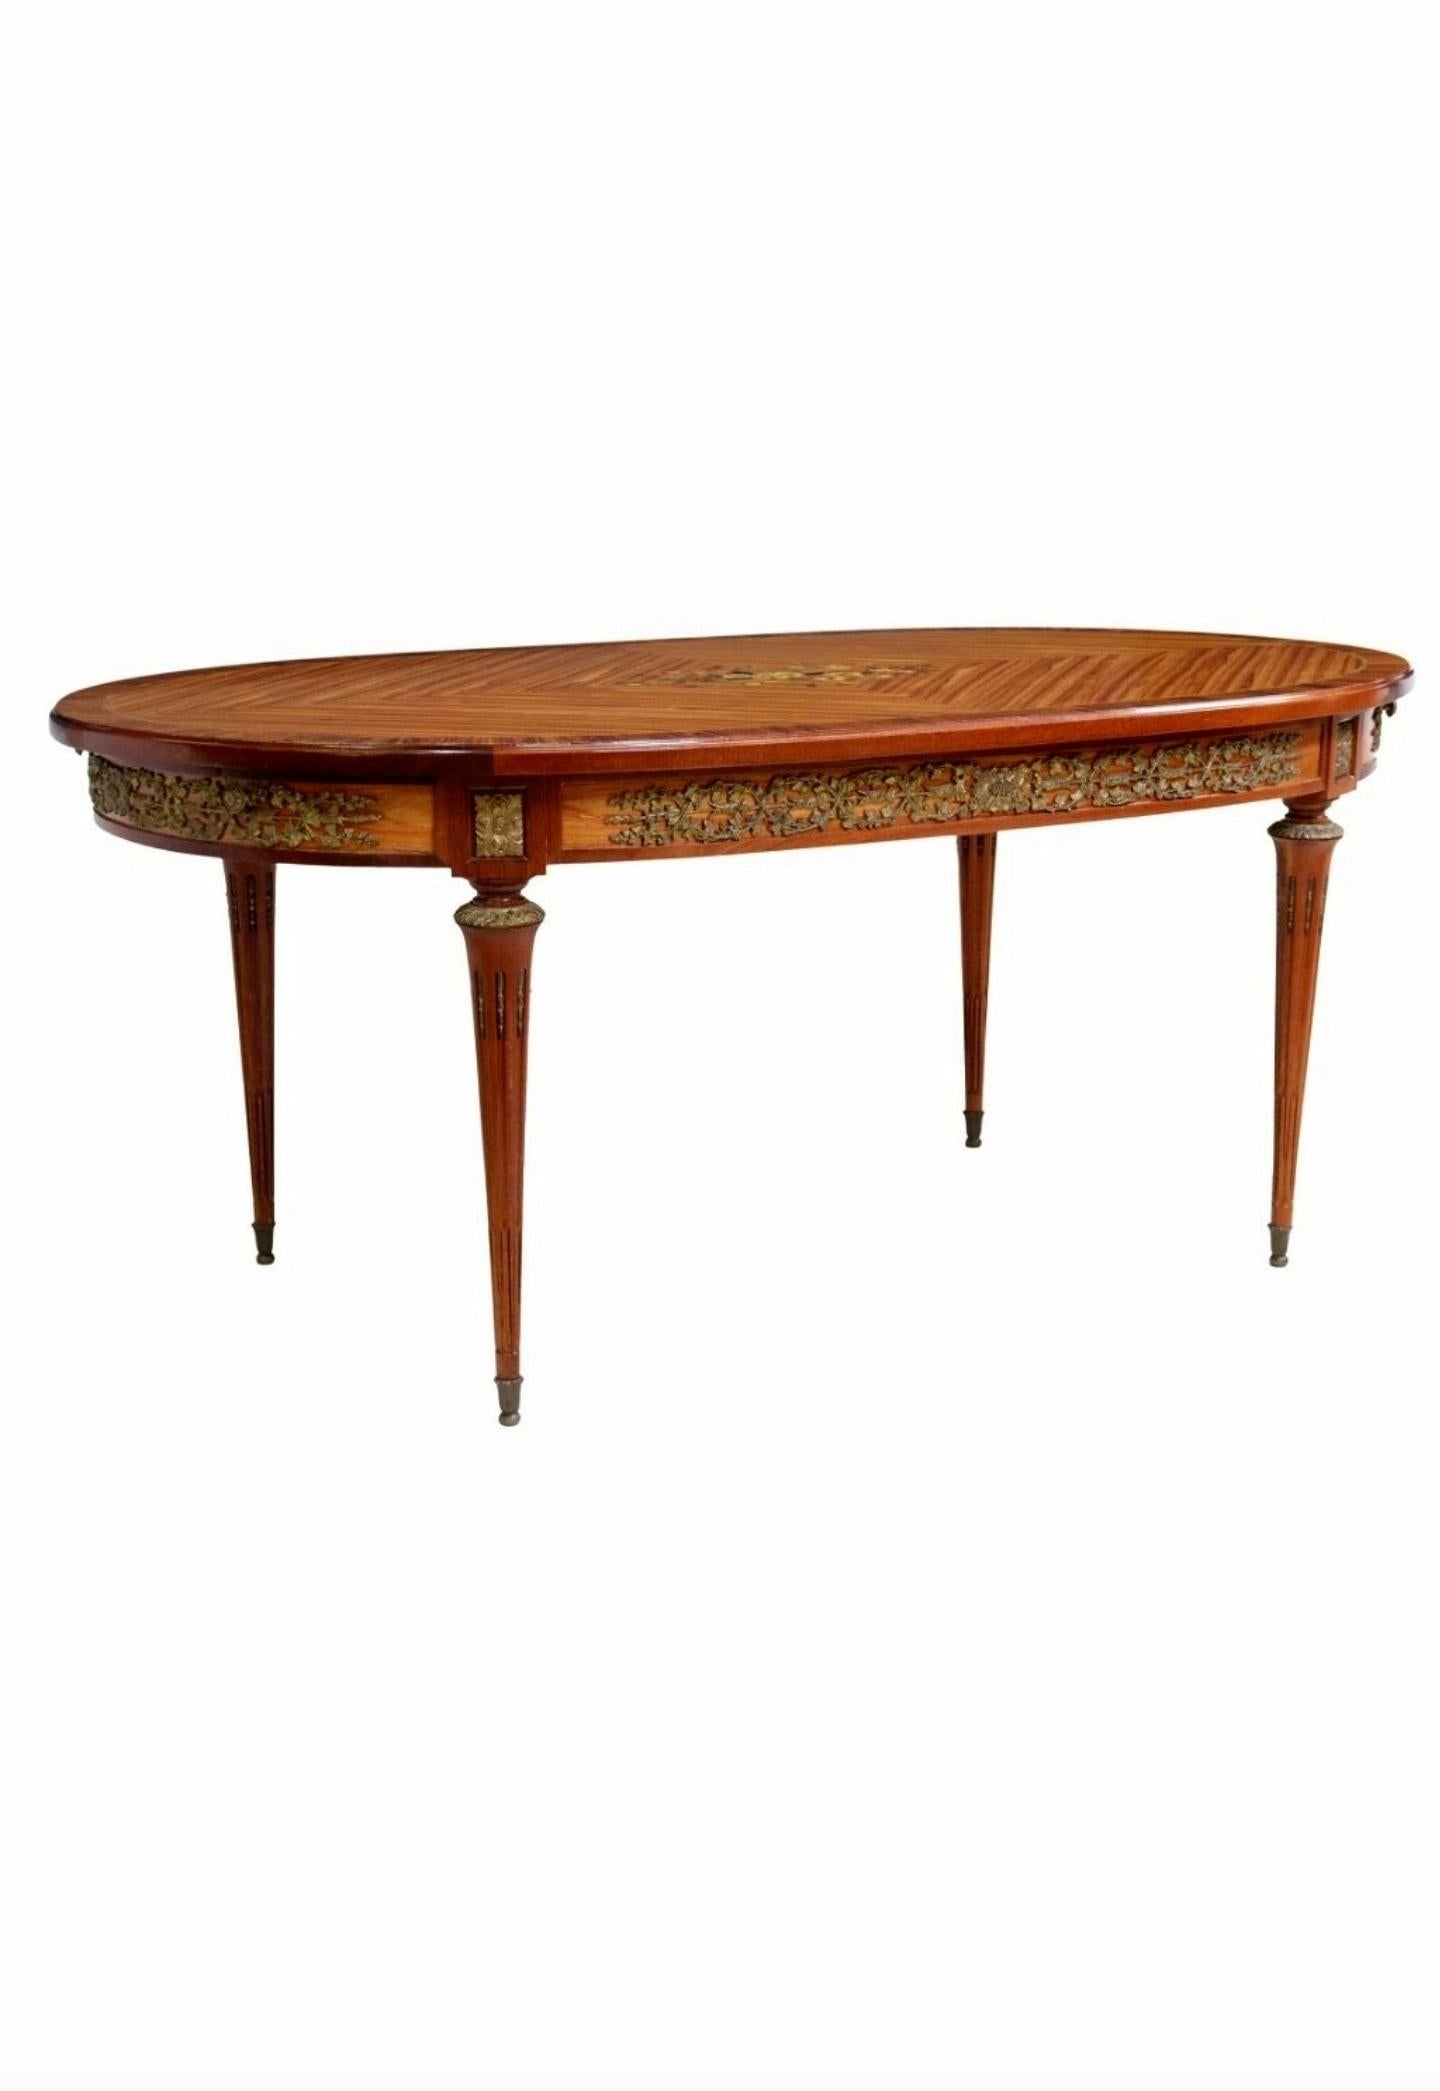 Hand-Crafted French Louis XVI Style Dining Table in the Manner of Jean-Pierre Ehalt